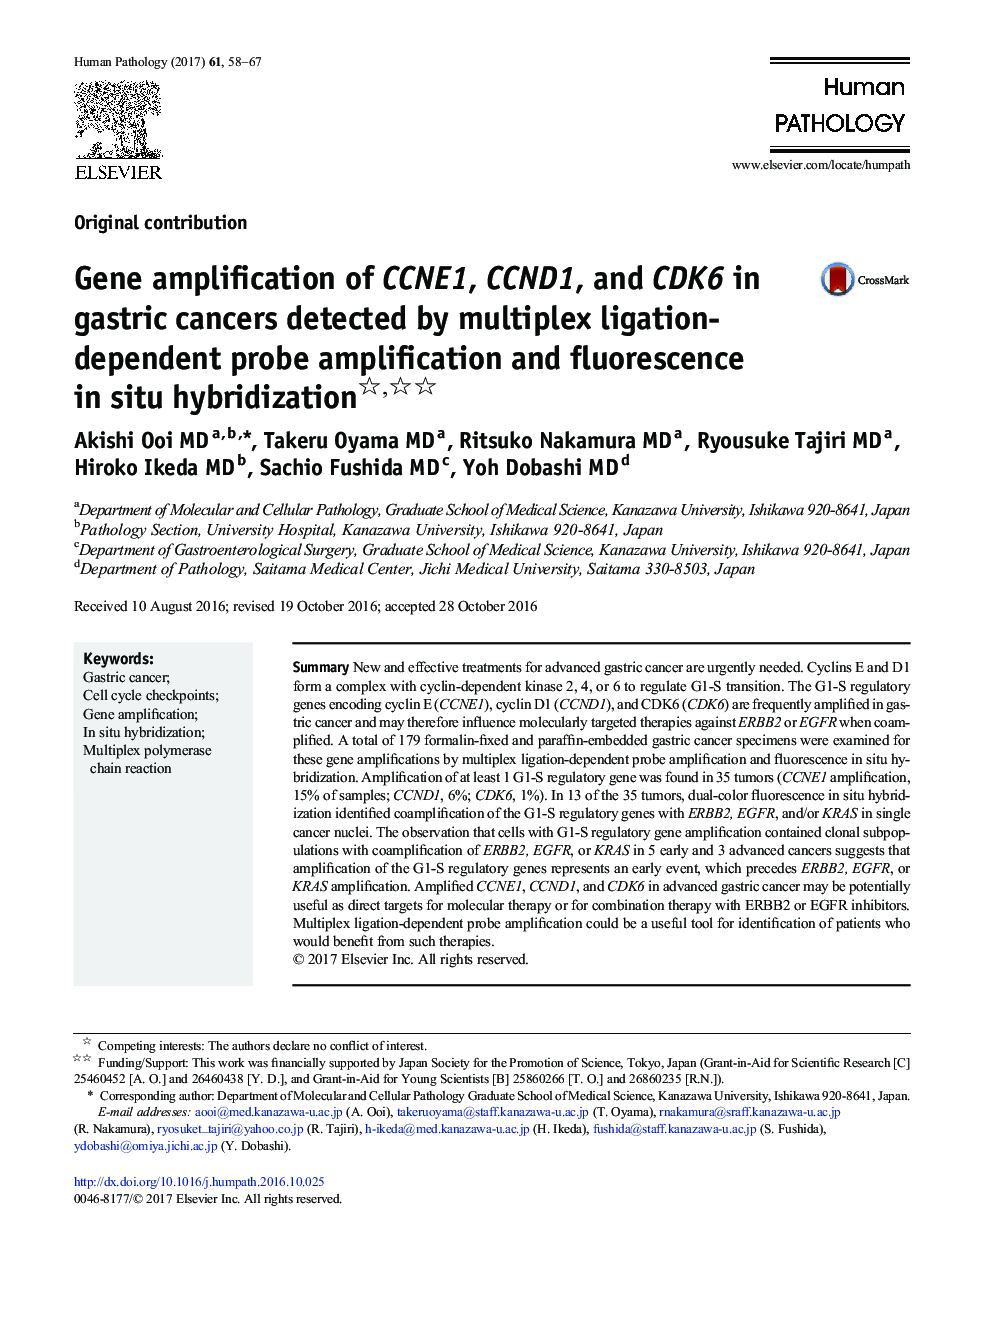 Original contributionGene amplification of CCNE1, CCND1, and CDK6 in gastric cancers detected by multiplex ligation-dependent probe amplification and fluorescence in situ hybridization